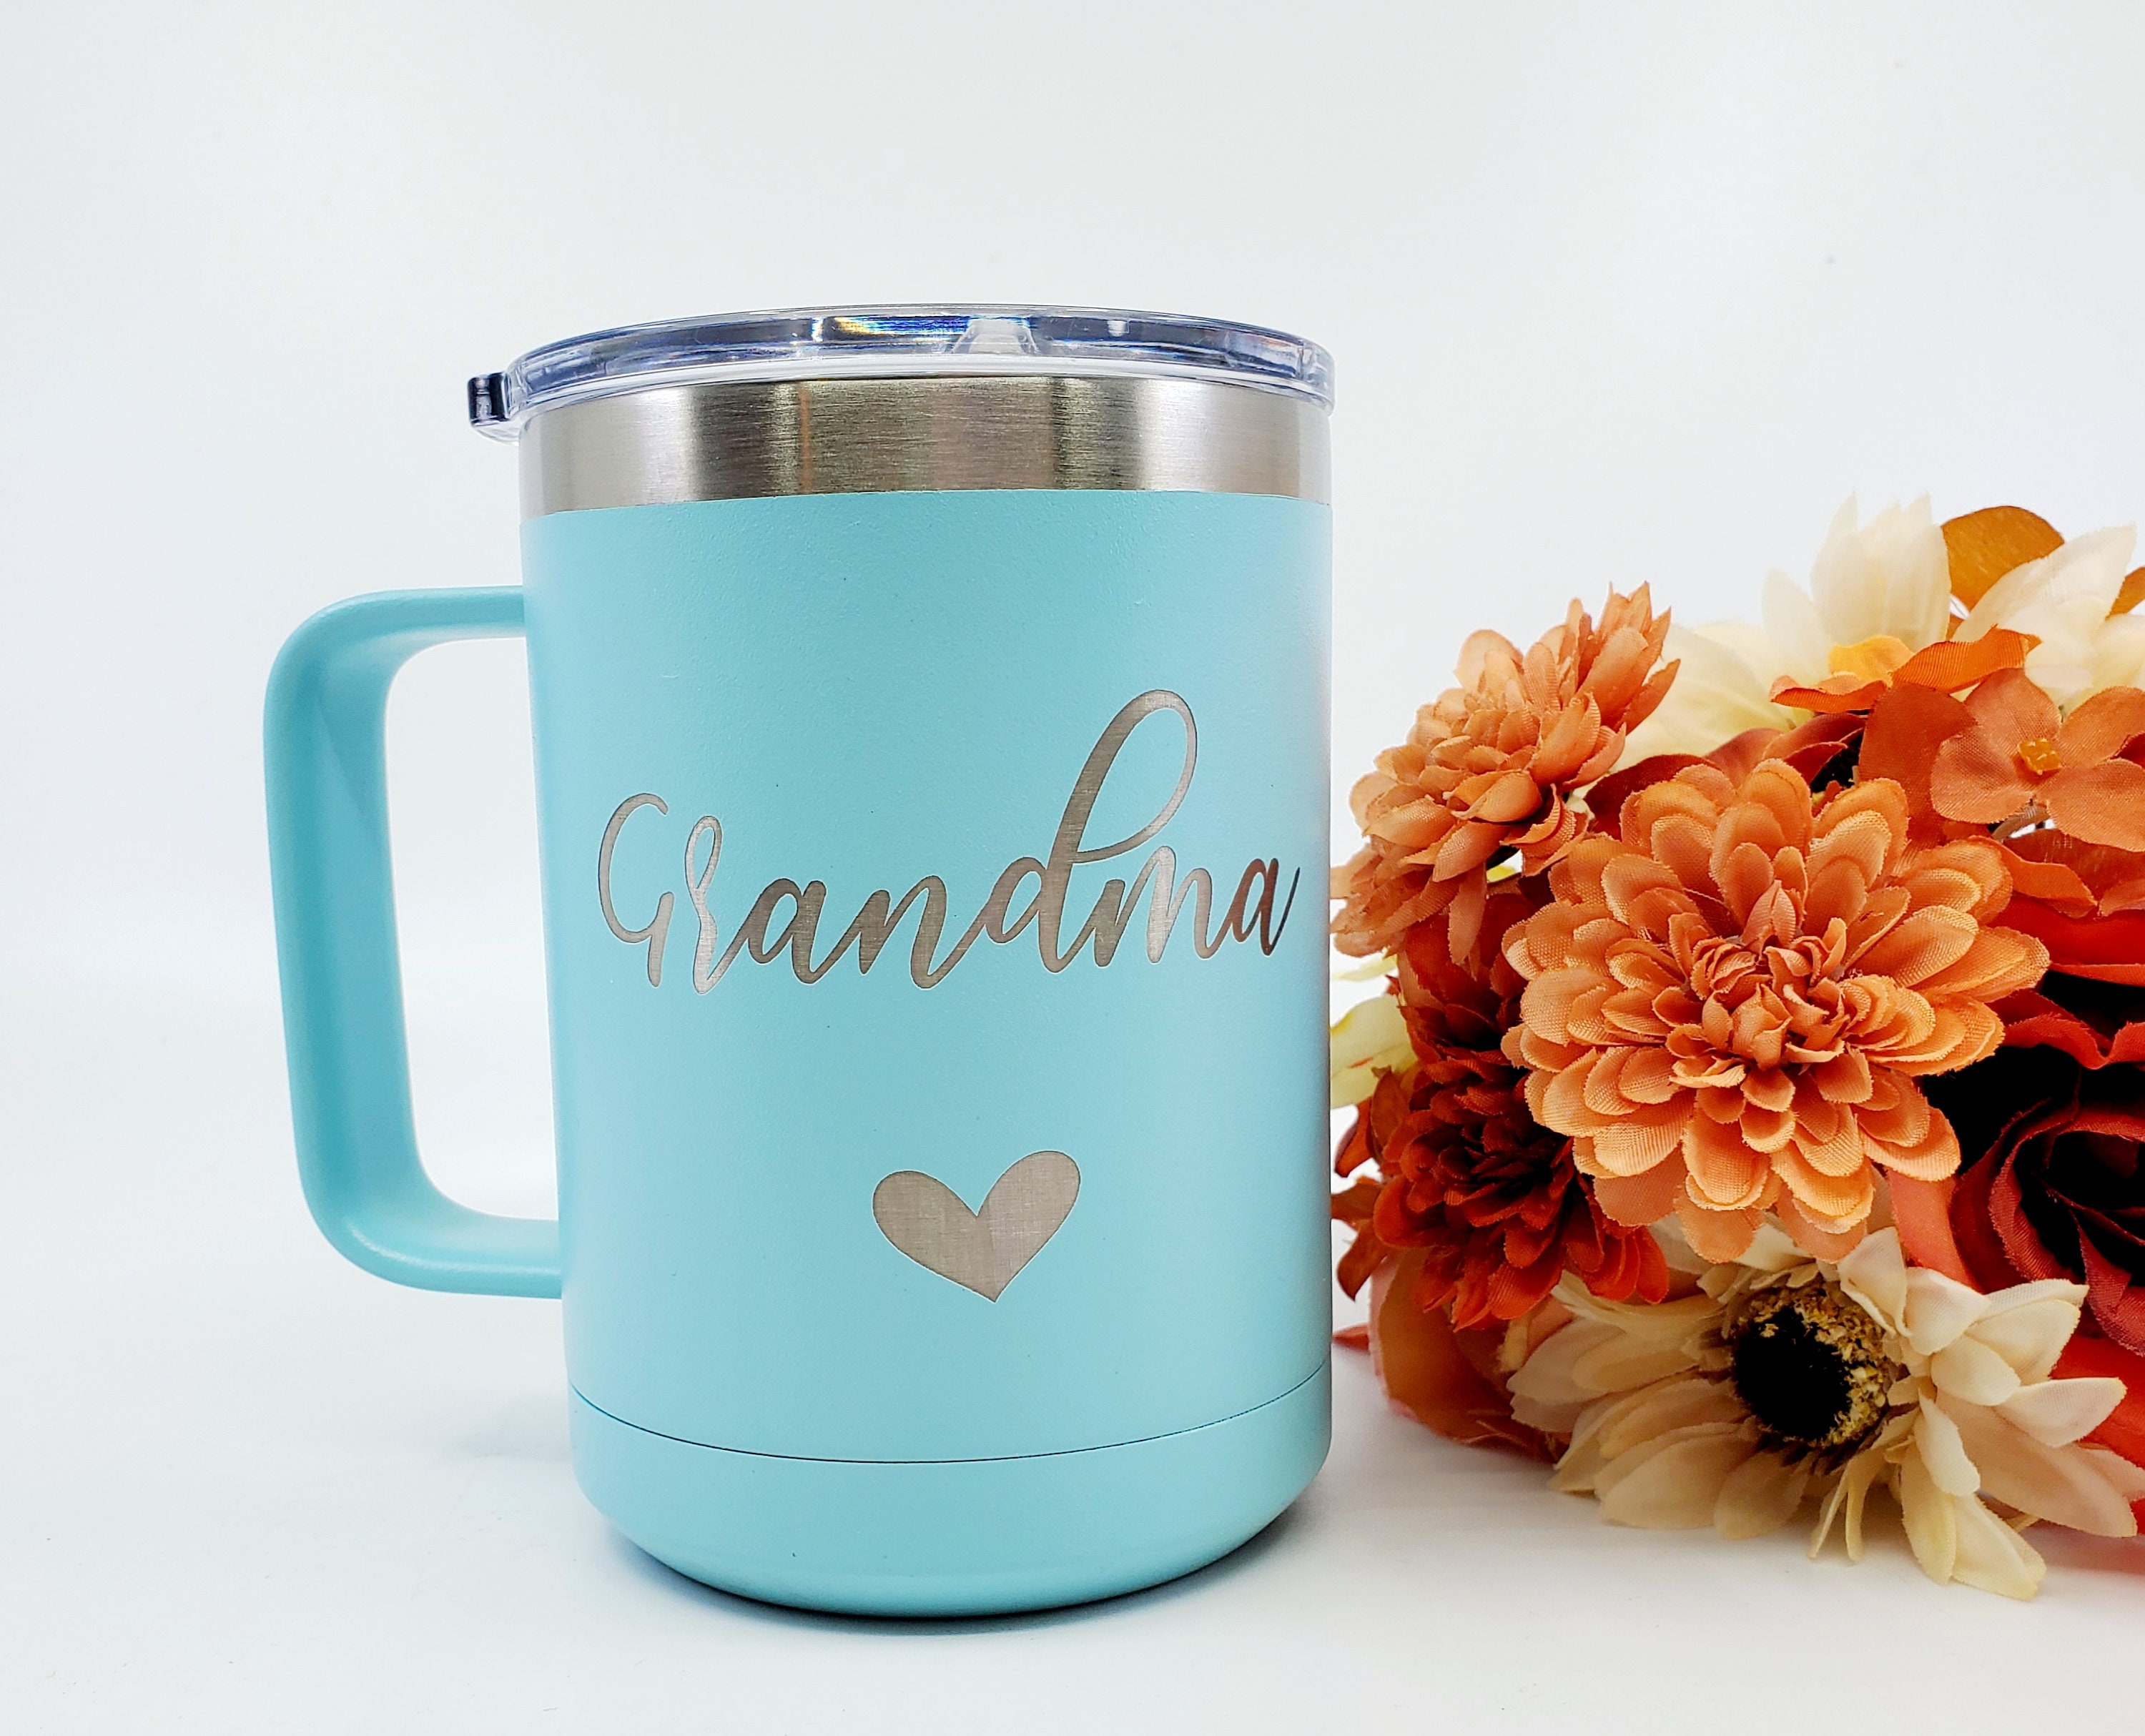  Gifts for Older Women - Gifts for The Elderly Woman - For 40 50  60 70 80 Year Old Woman - Insulated Travel Coffee Mug for Mom, Grandmother,  Grandma : Home & Kitchen